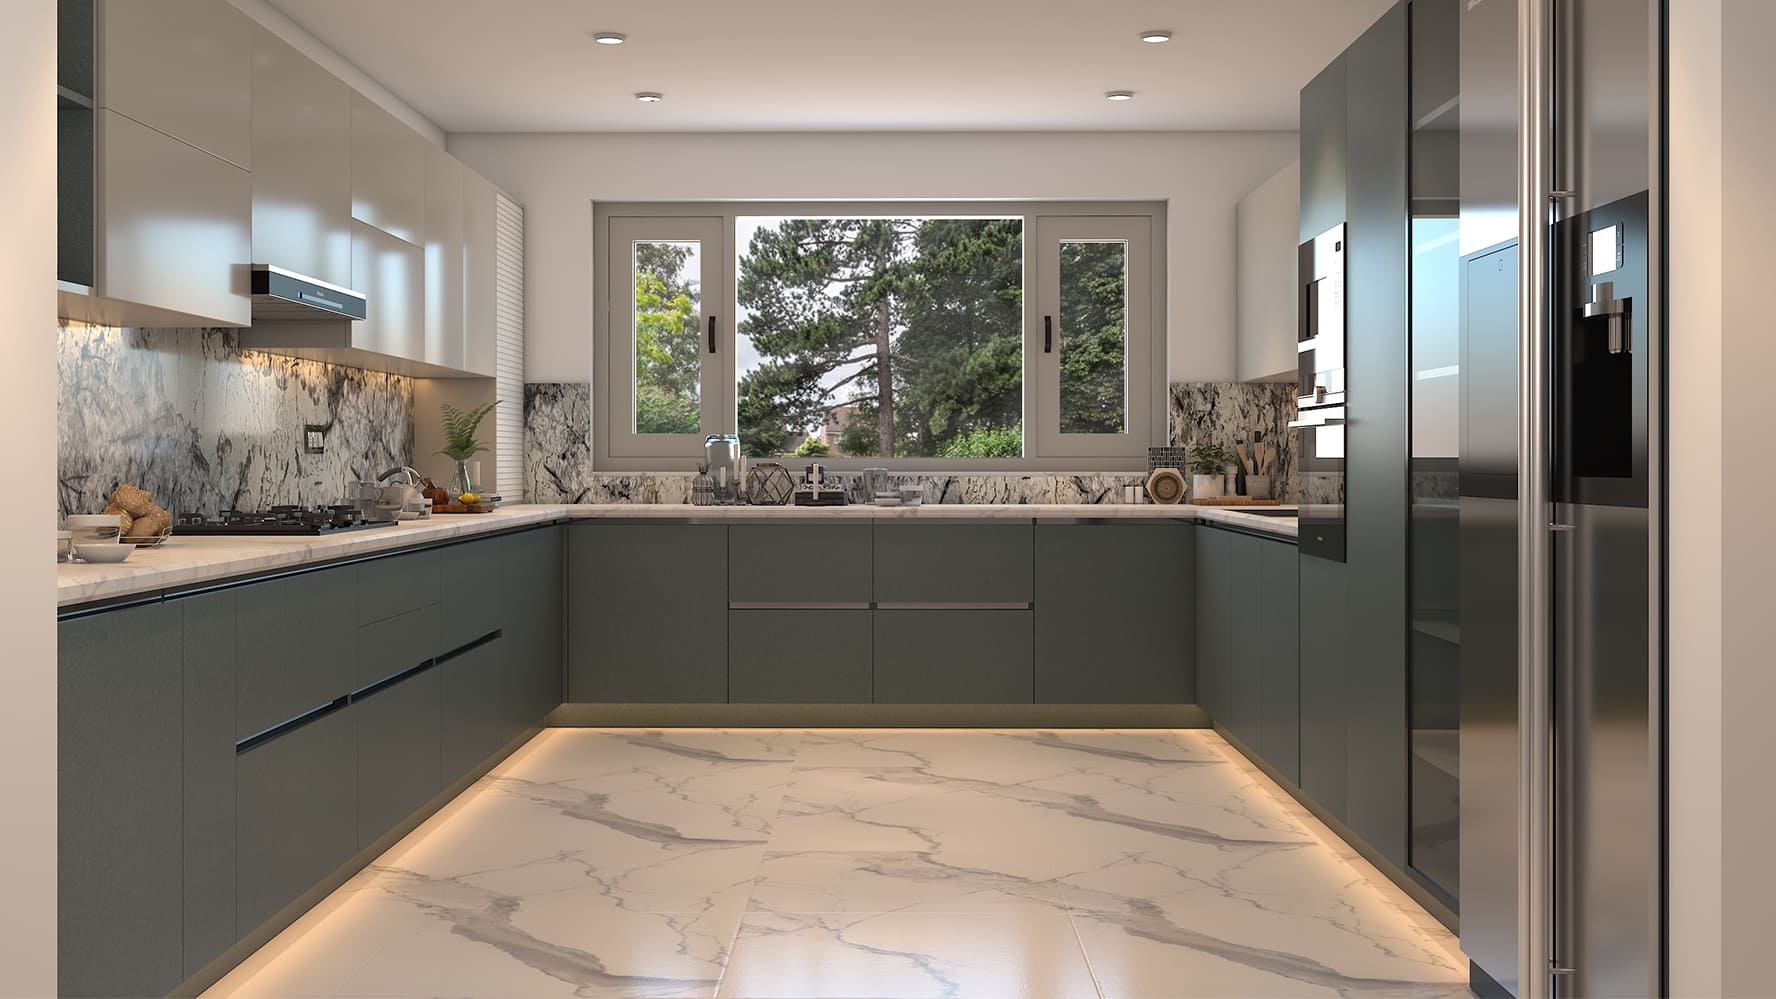 green cooking ،e with marble flooring, cabinets and appliances